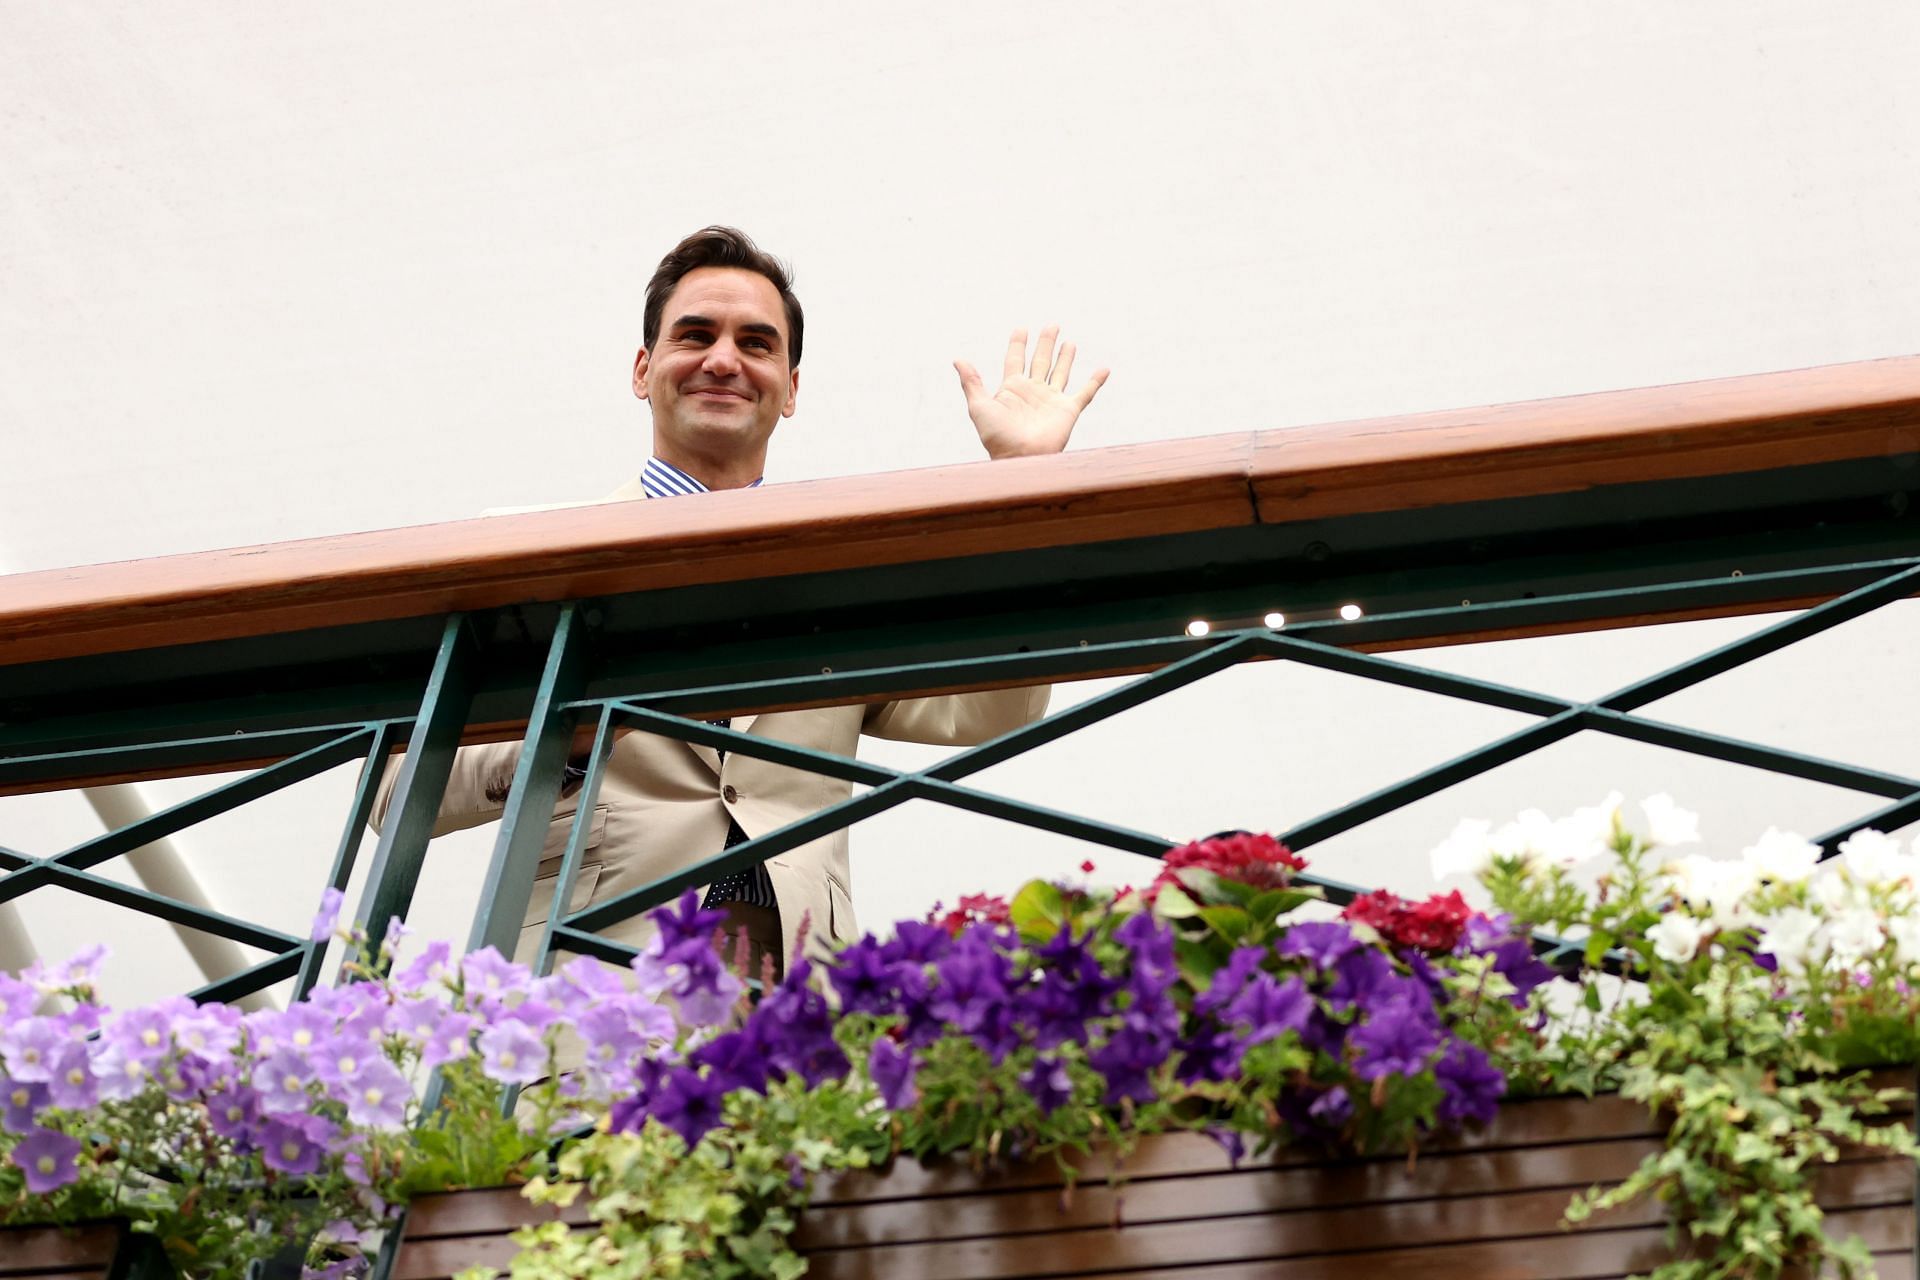 Roger Federer at the All England Club on Day 2 of the 2023- Wimbledon Championships.